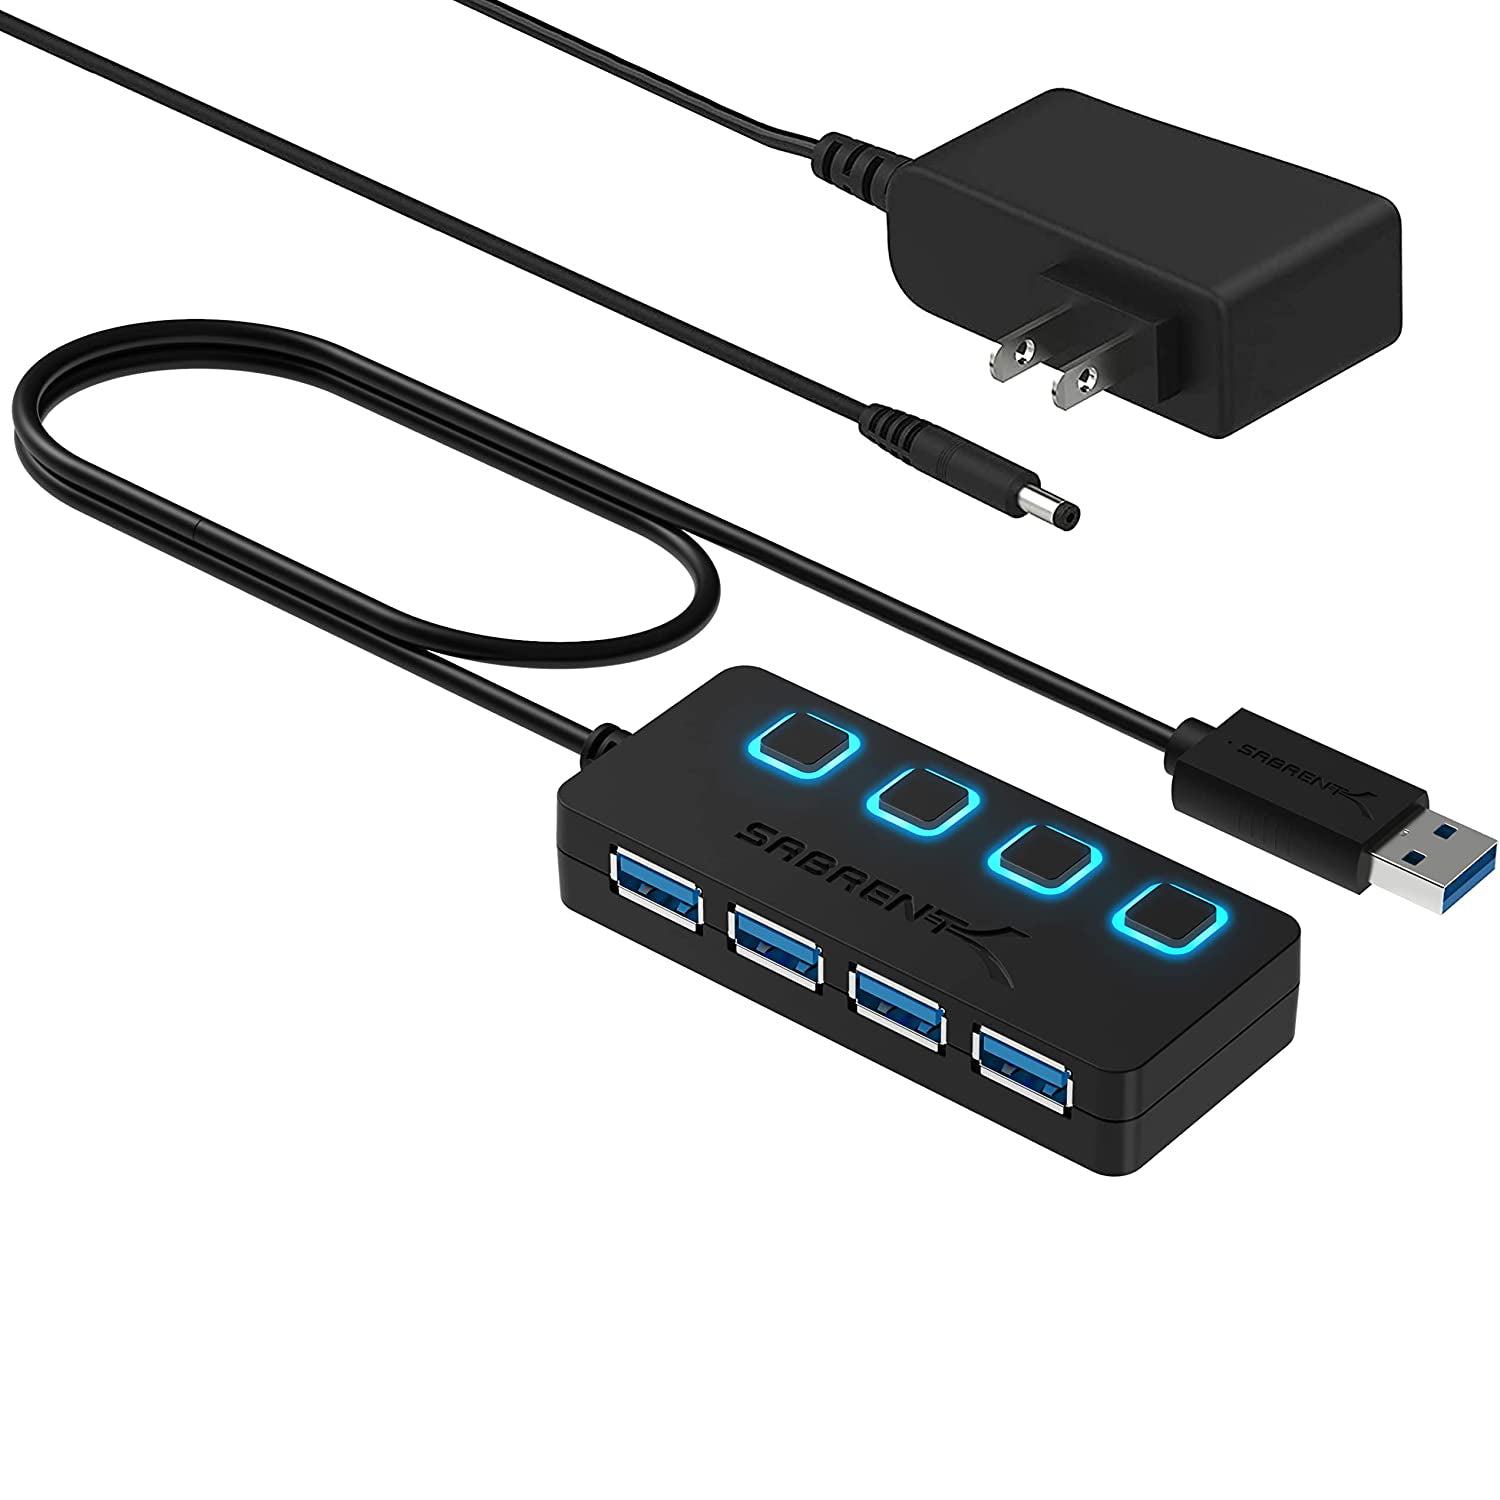 Sabrent HB-UMP3 4-Port USB 3.0 Hub with Power Adapter